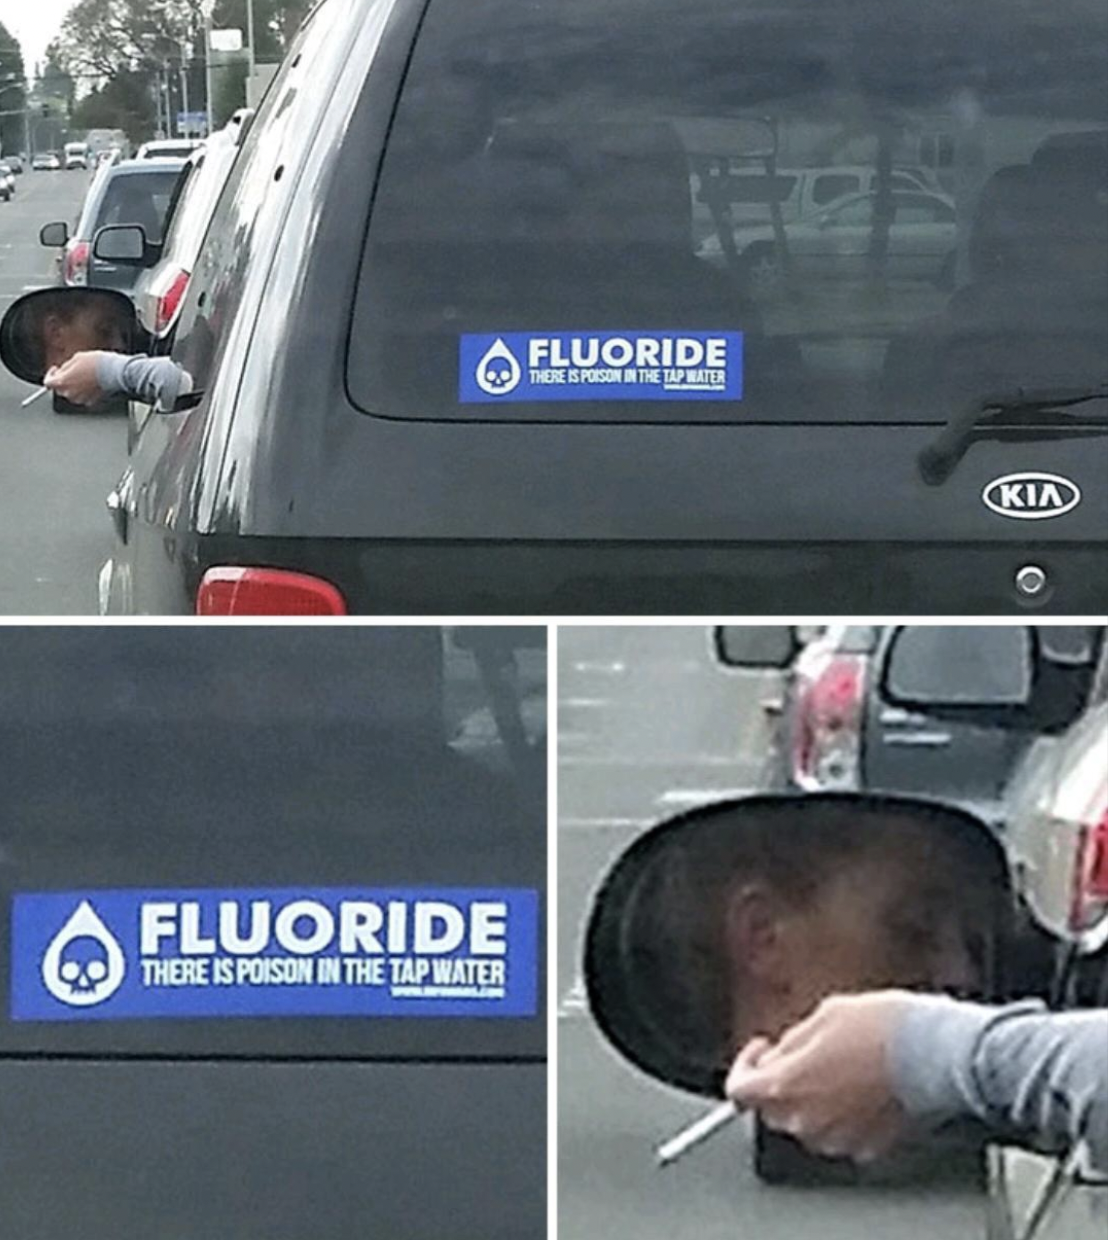 Meme - Fluoride There Is Poison In The Tap Water Fluoride There Is Porton In Theater Kia